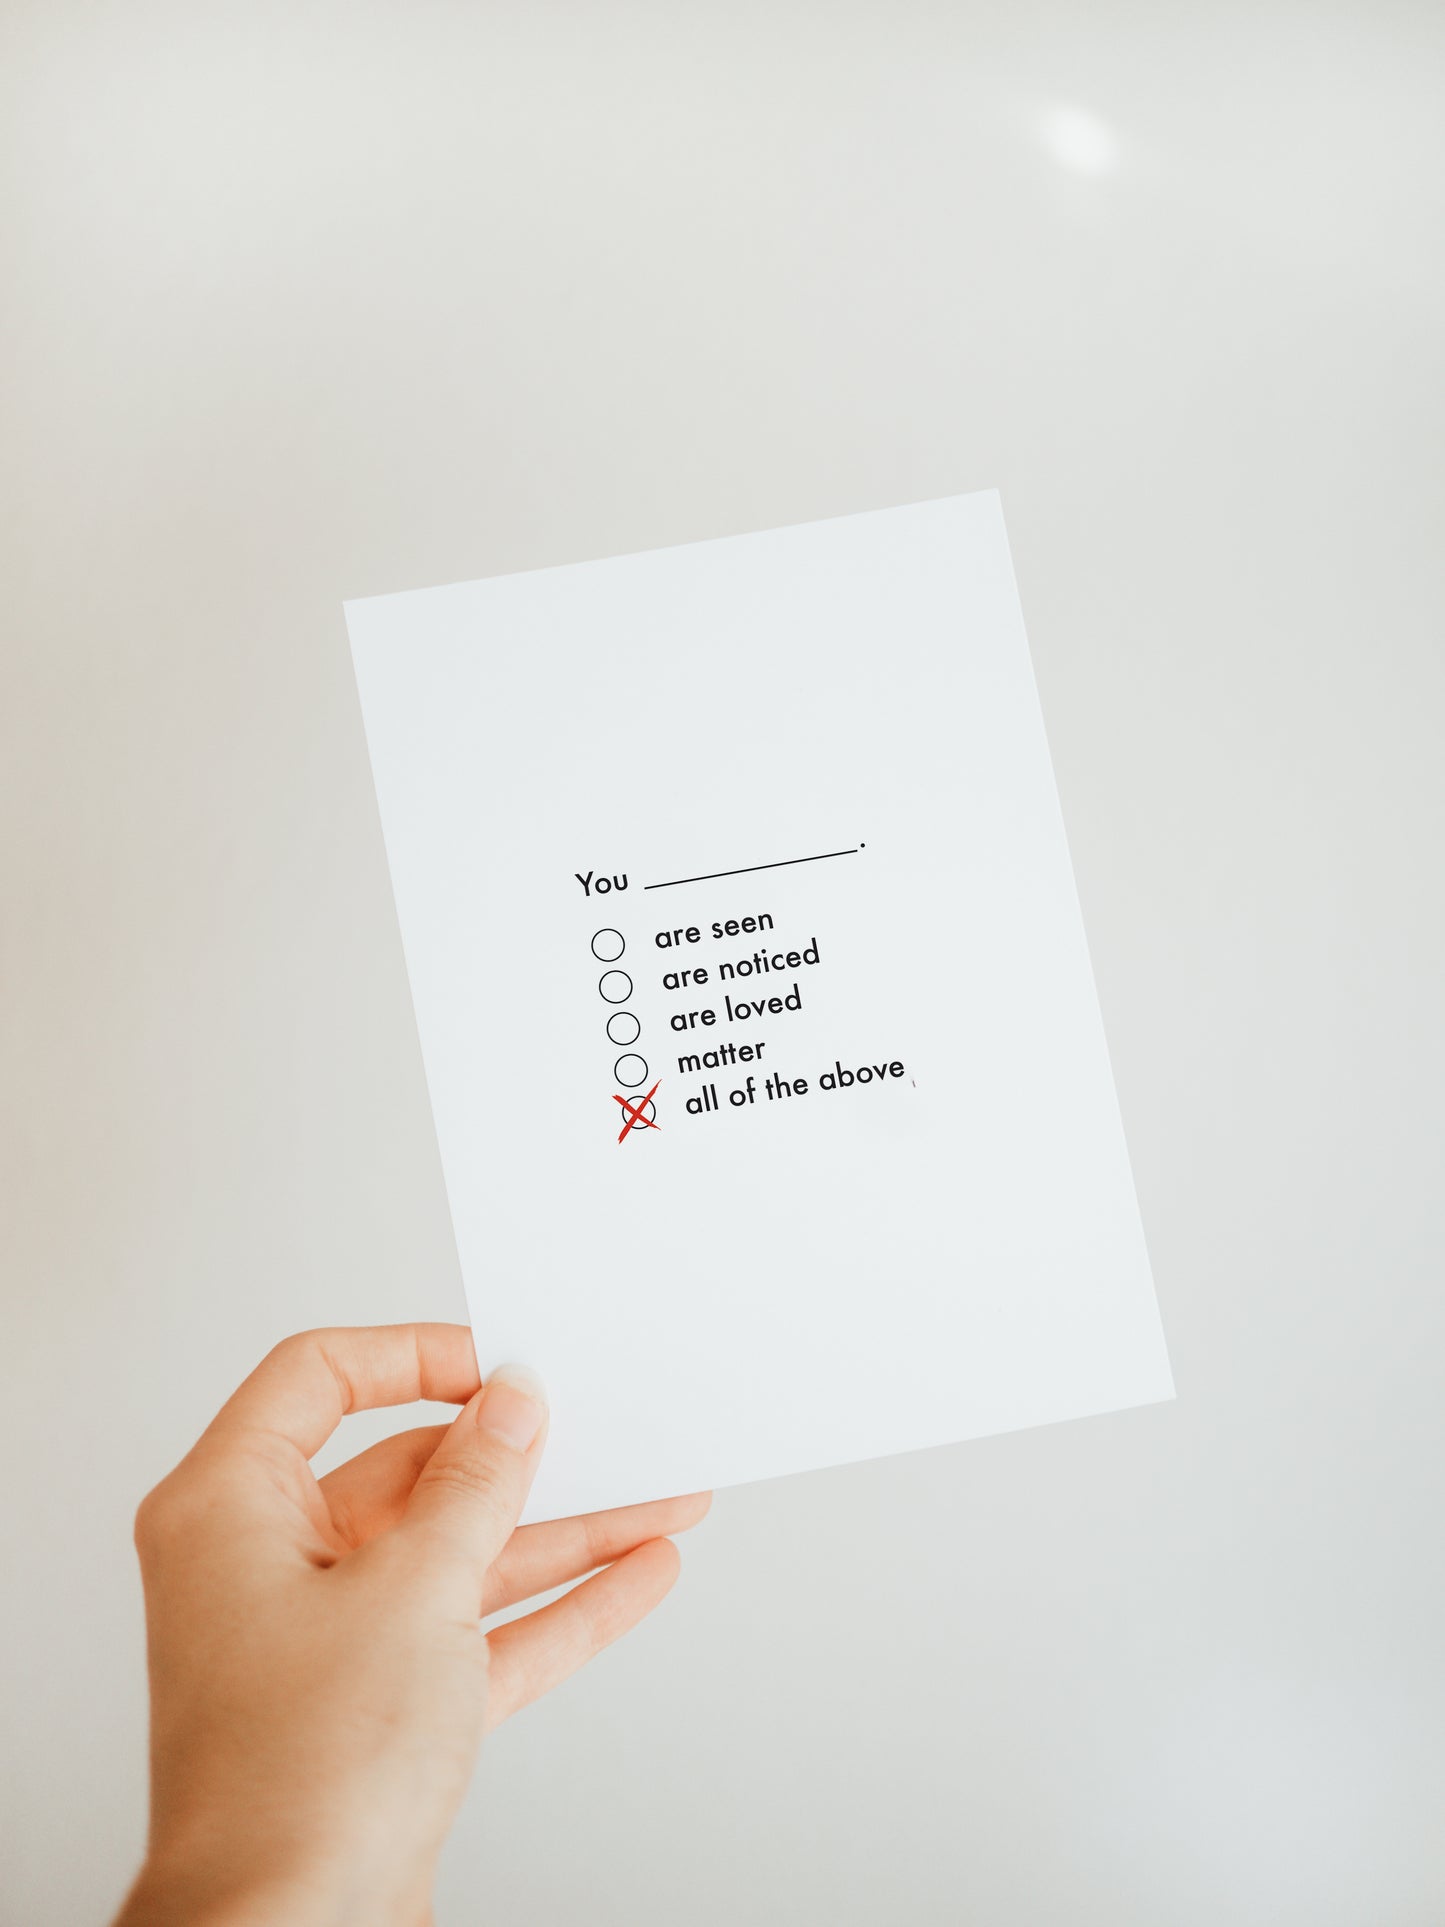 hand holding a white greeting card with the words "you" followed by check boxes with the options "are seen, are noticed, are loved, matter, all of the above" the last option of "all of the above" is checked with a red mark